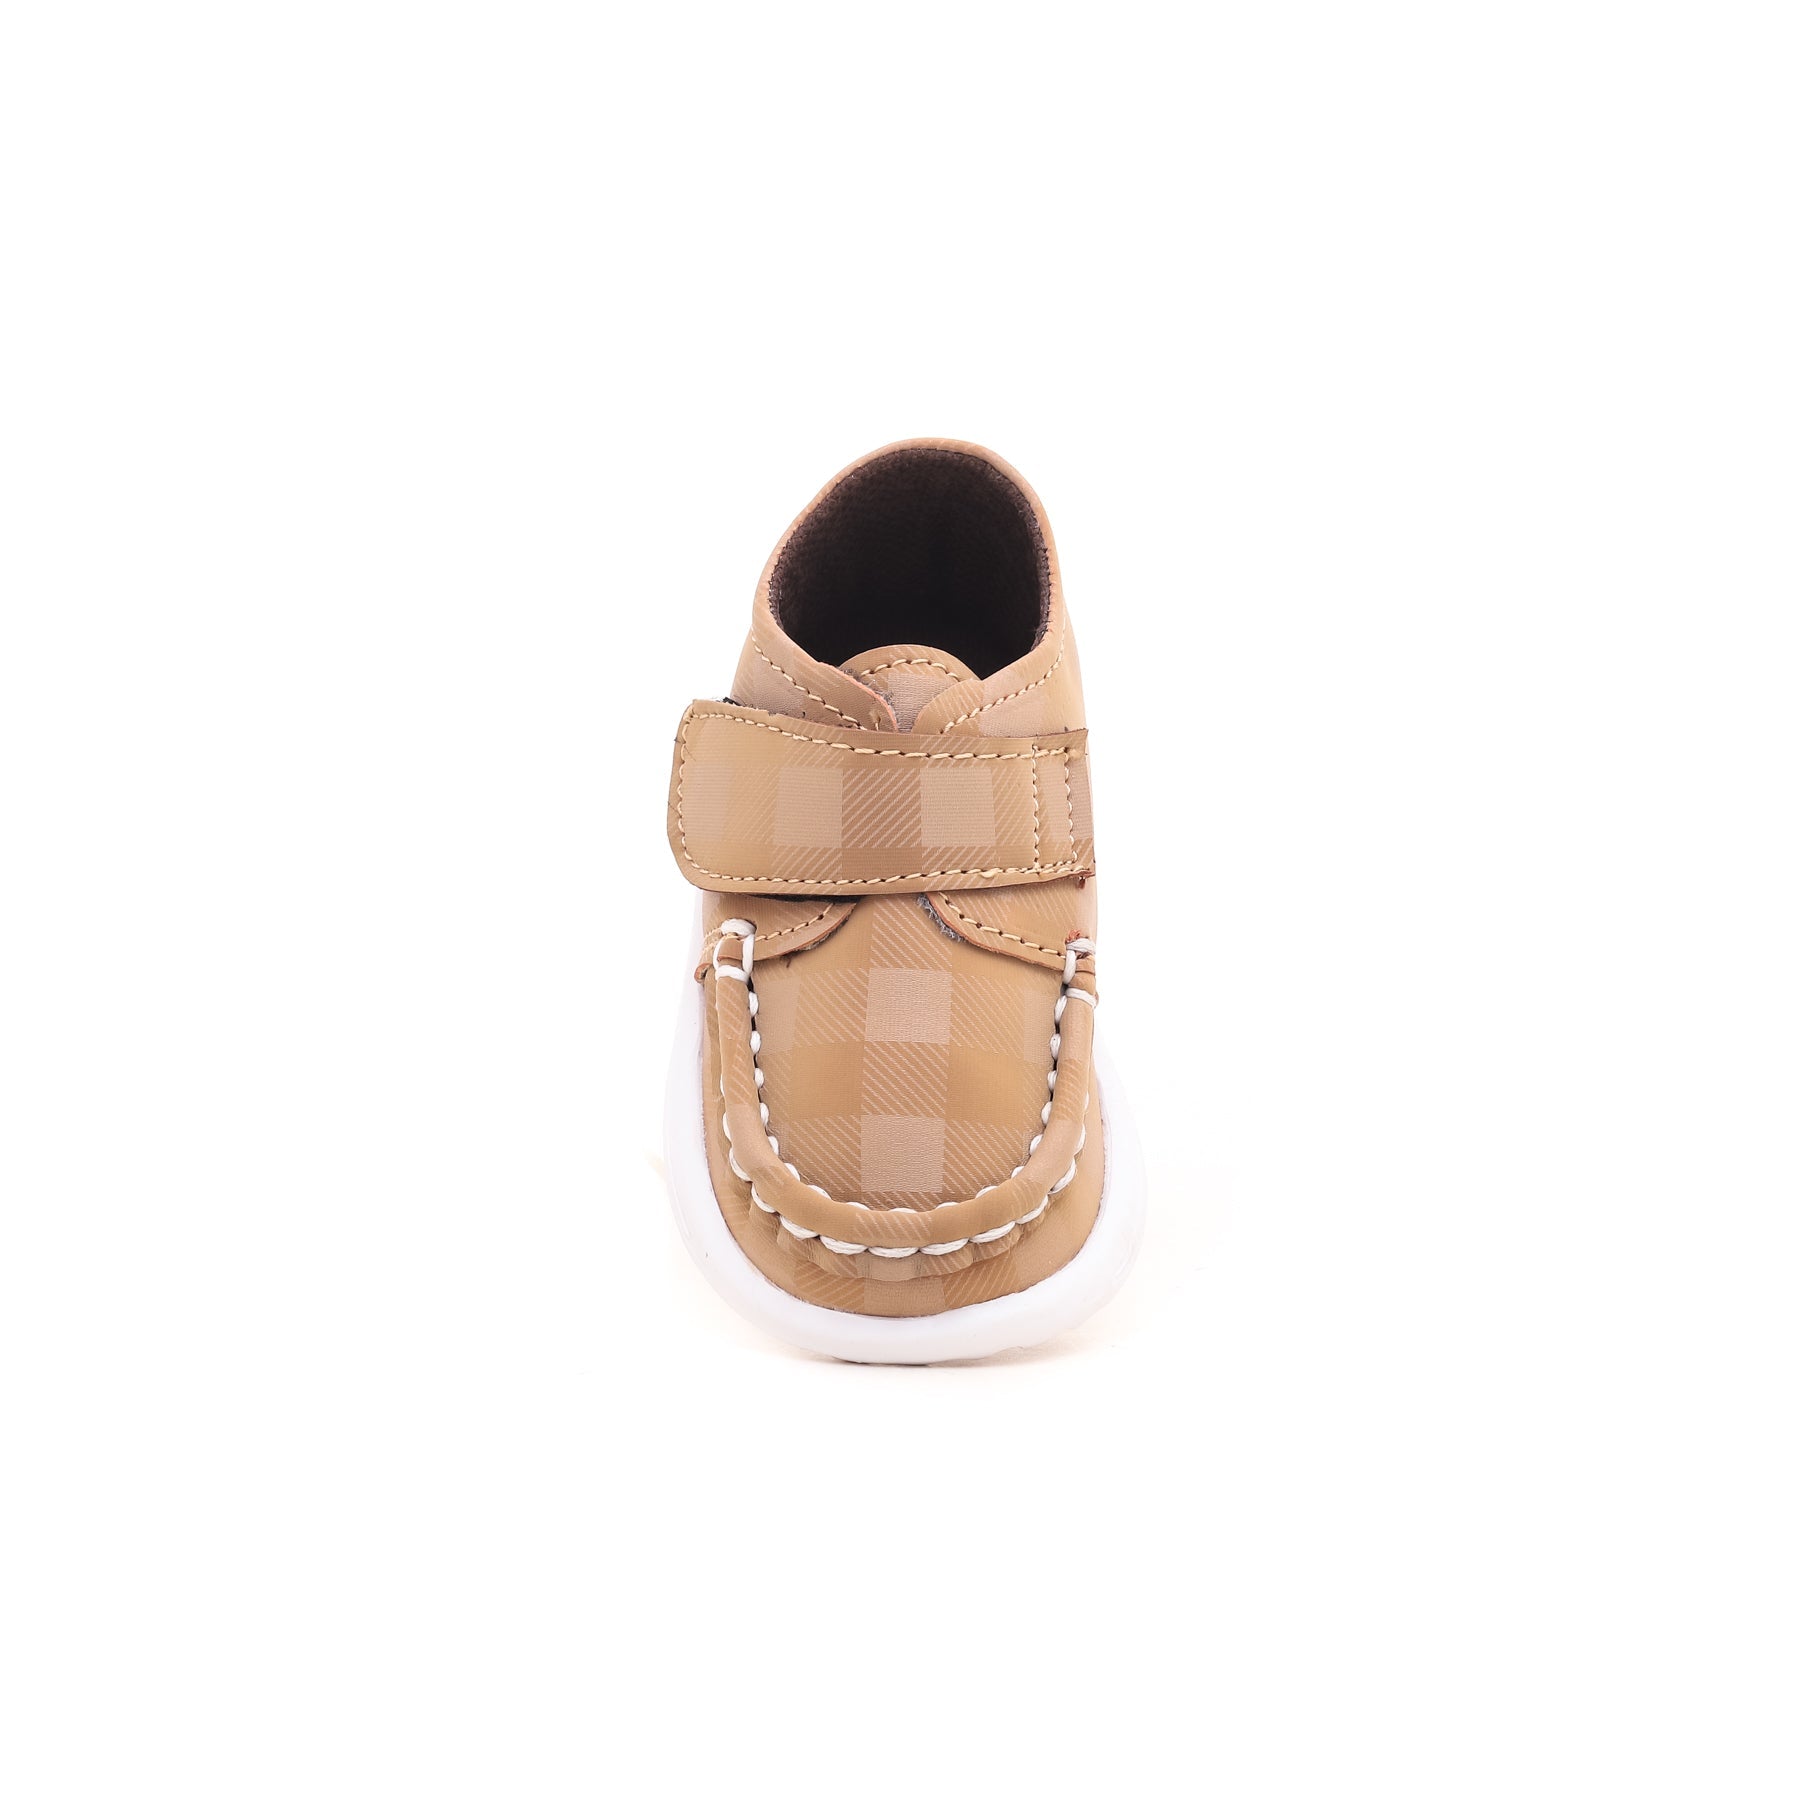 Babies Fawn Casual Booties KD7747